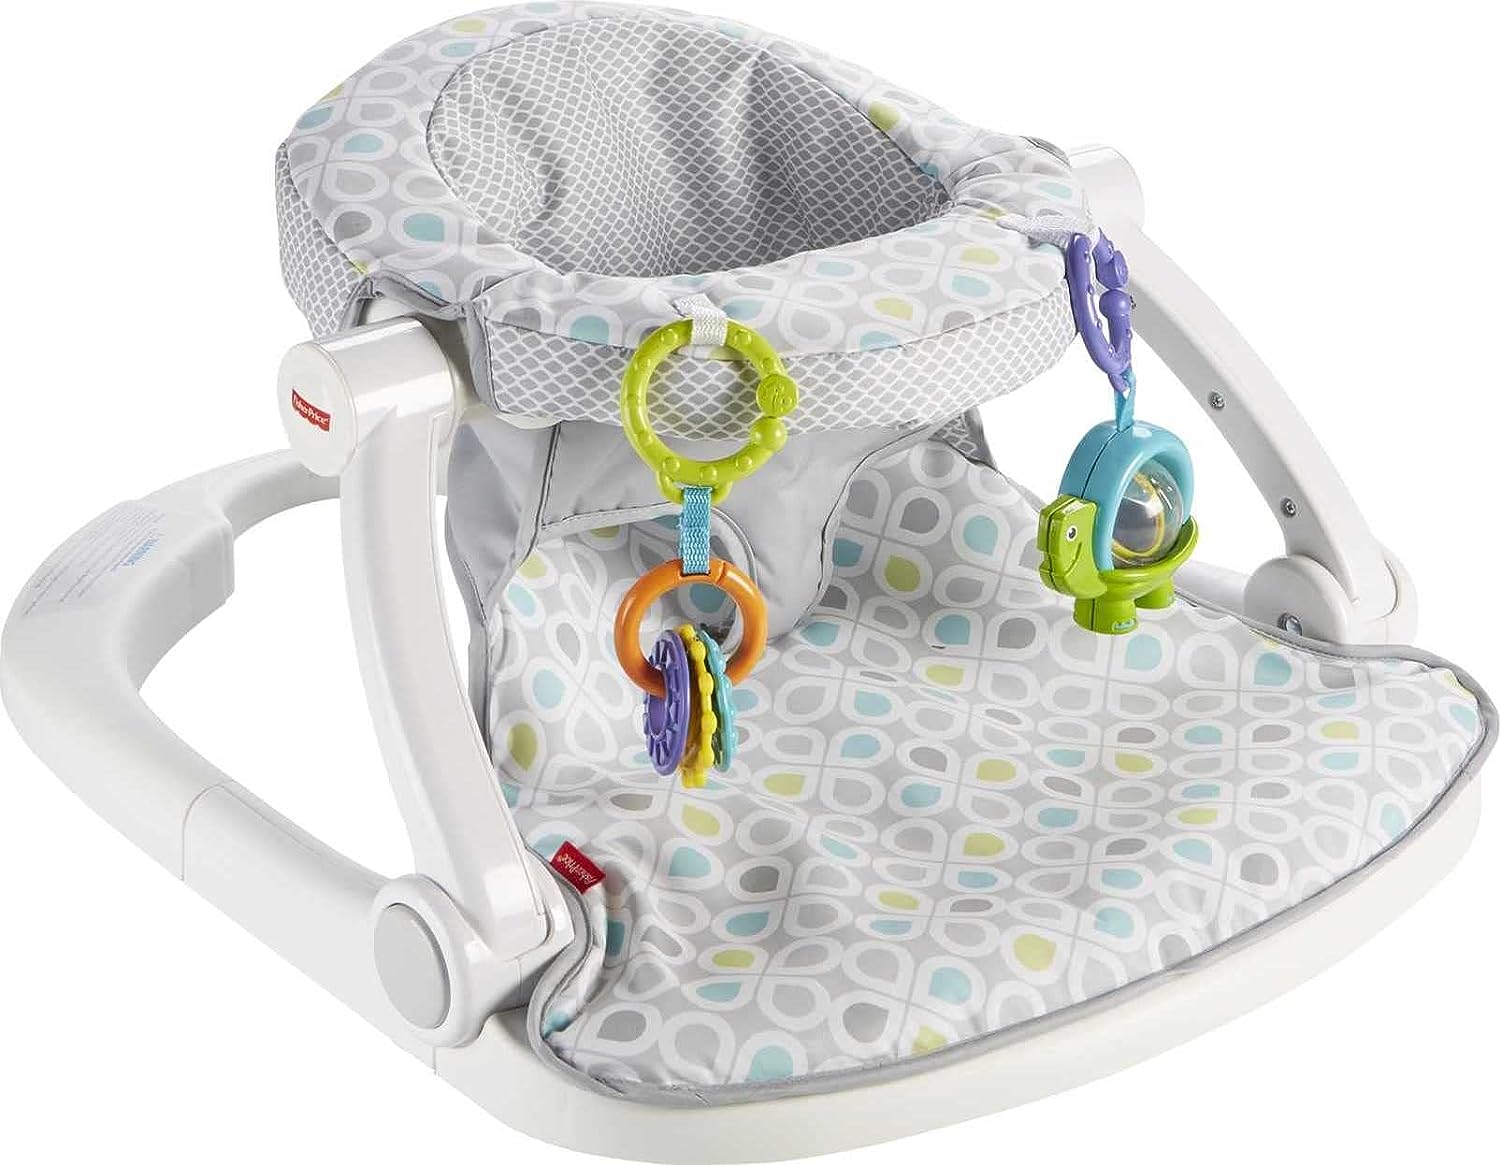 Portable Baby Chair Sit-Me-Up Floor Seat